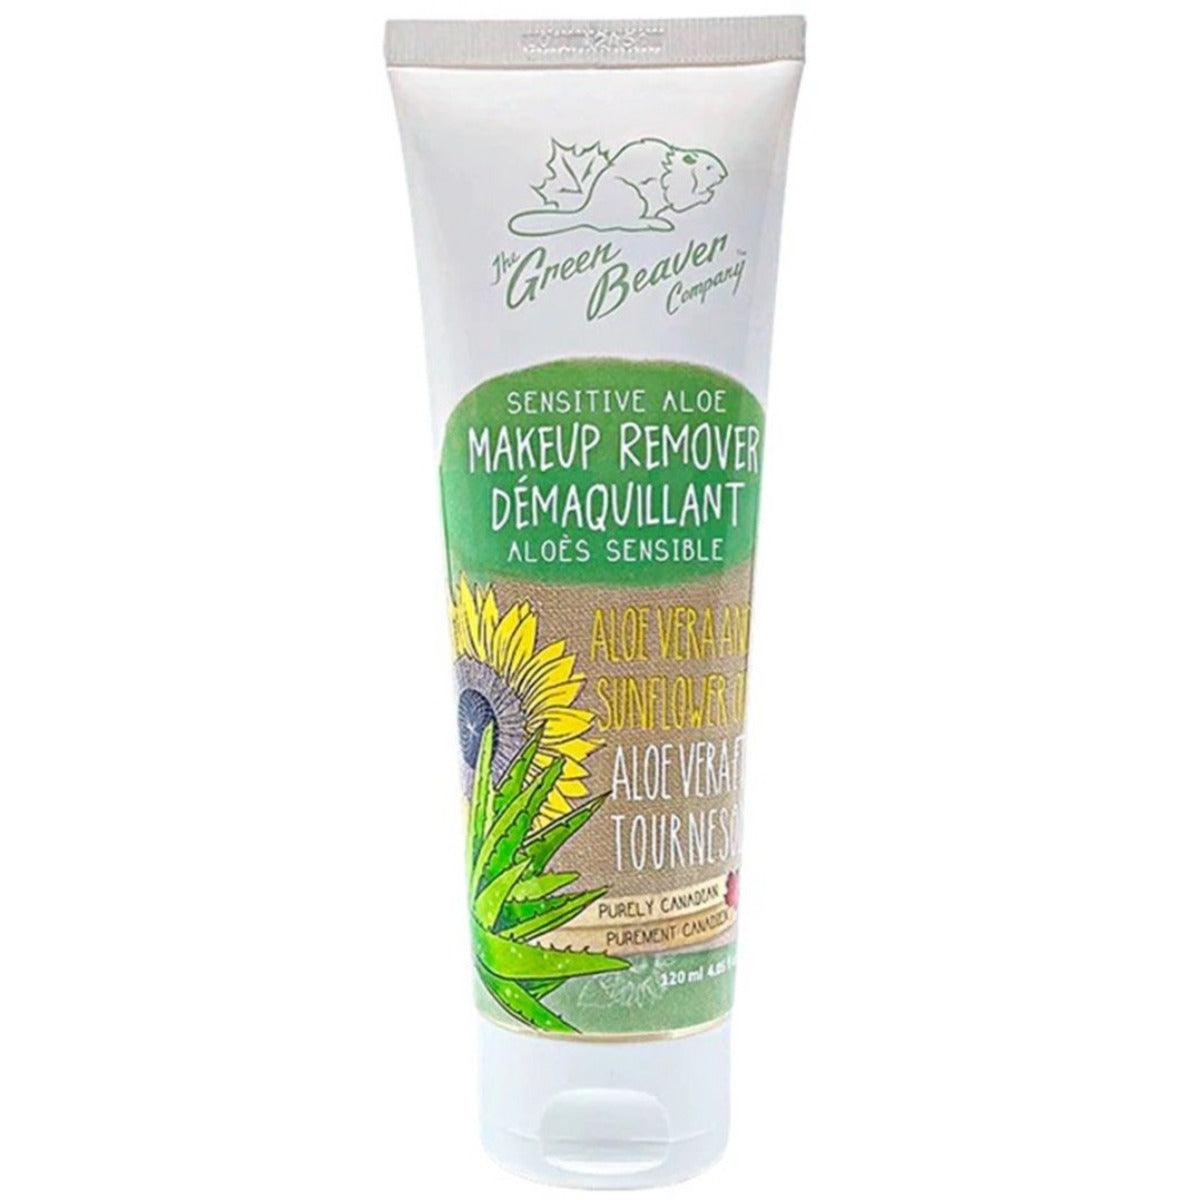 Green Beaver Makeup Remover Sensitive Aloe 120mL Face Cleansers at Village Vitamin Store